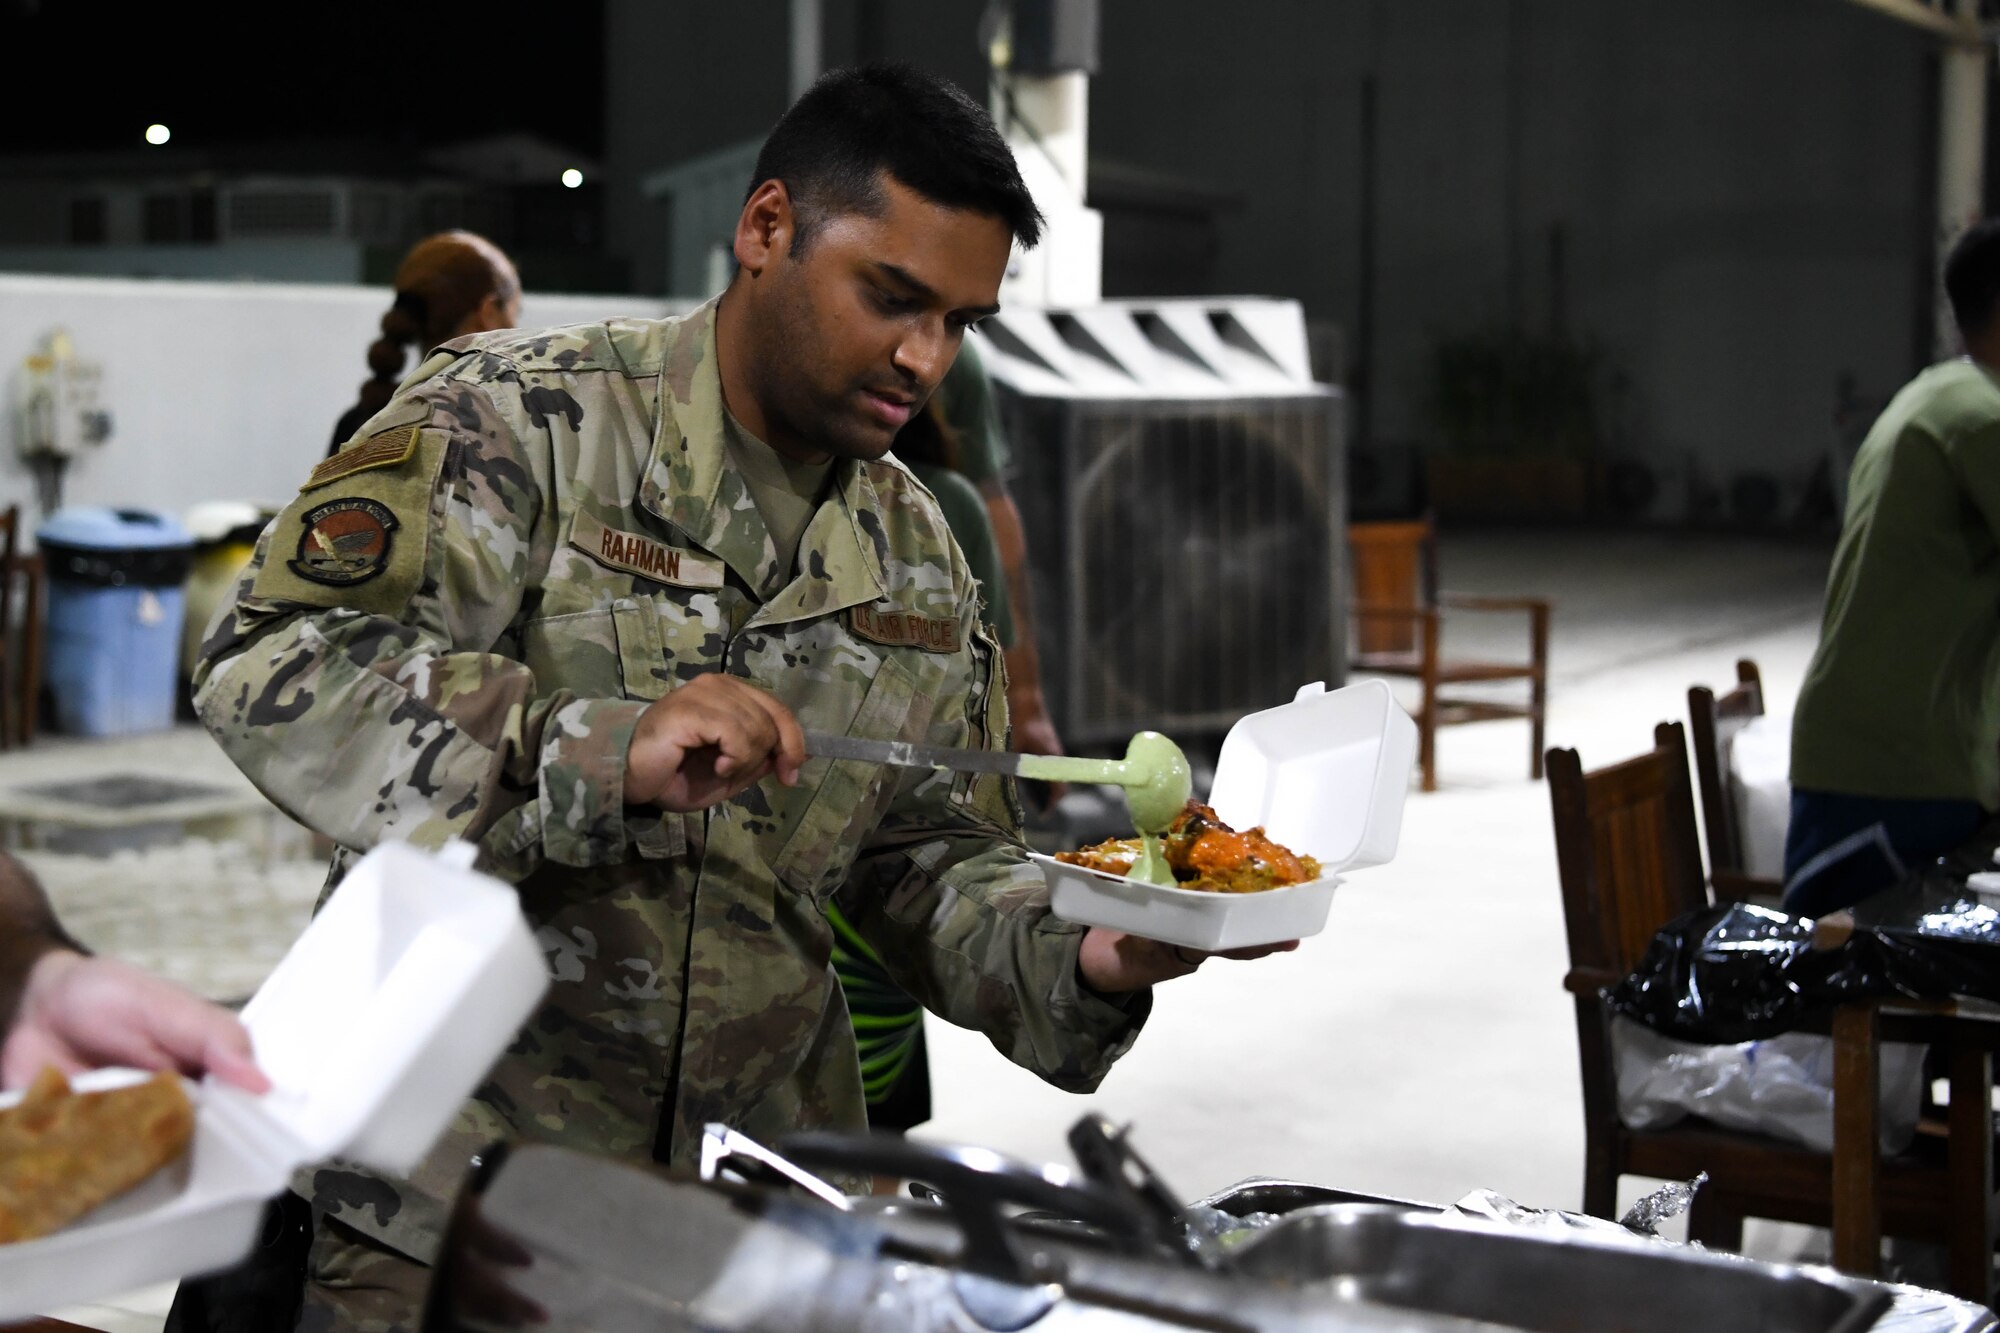 The intent of the event was to allow Airmen across the spectrum of diversity to come out and share their cultures.